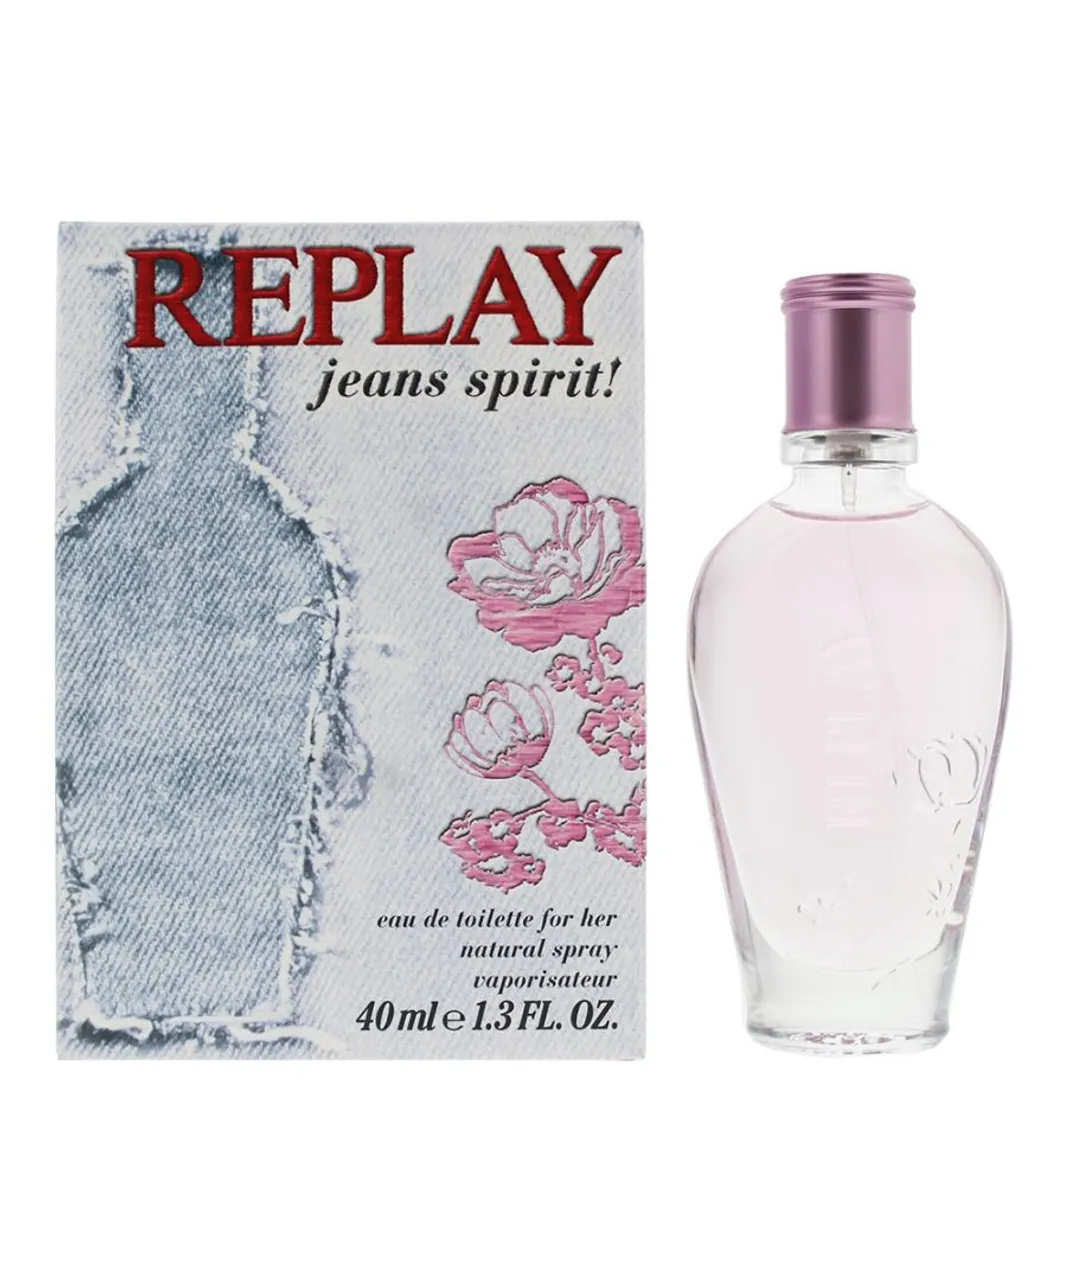 Replay Womens Jeans Spirit! For Her Eau de Toilette 40ml Spray - Violet - One Size